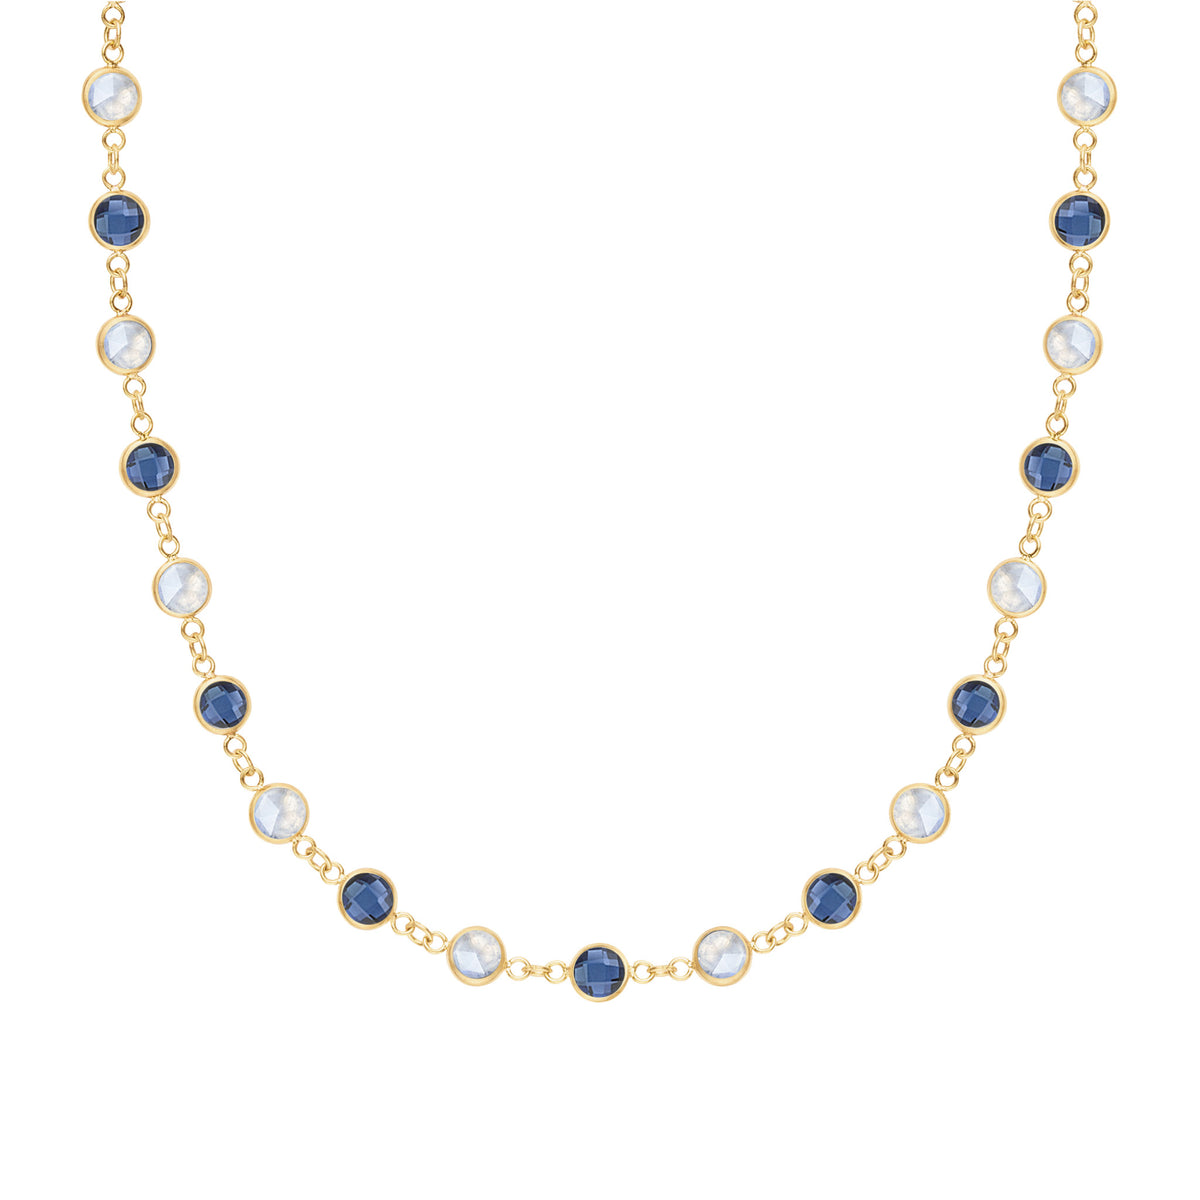 Terra Newport Necklace in 14k Gold - 14k Yellow Gold / X-Small (14 + 2  Extender)